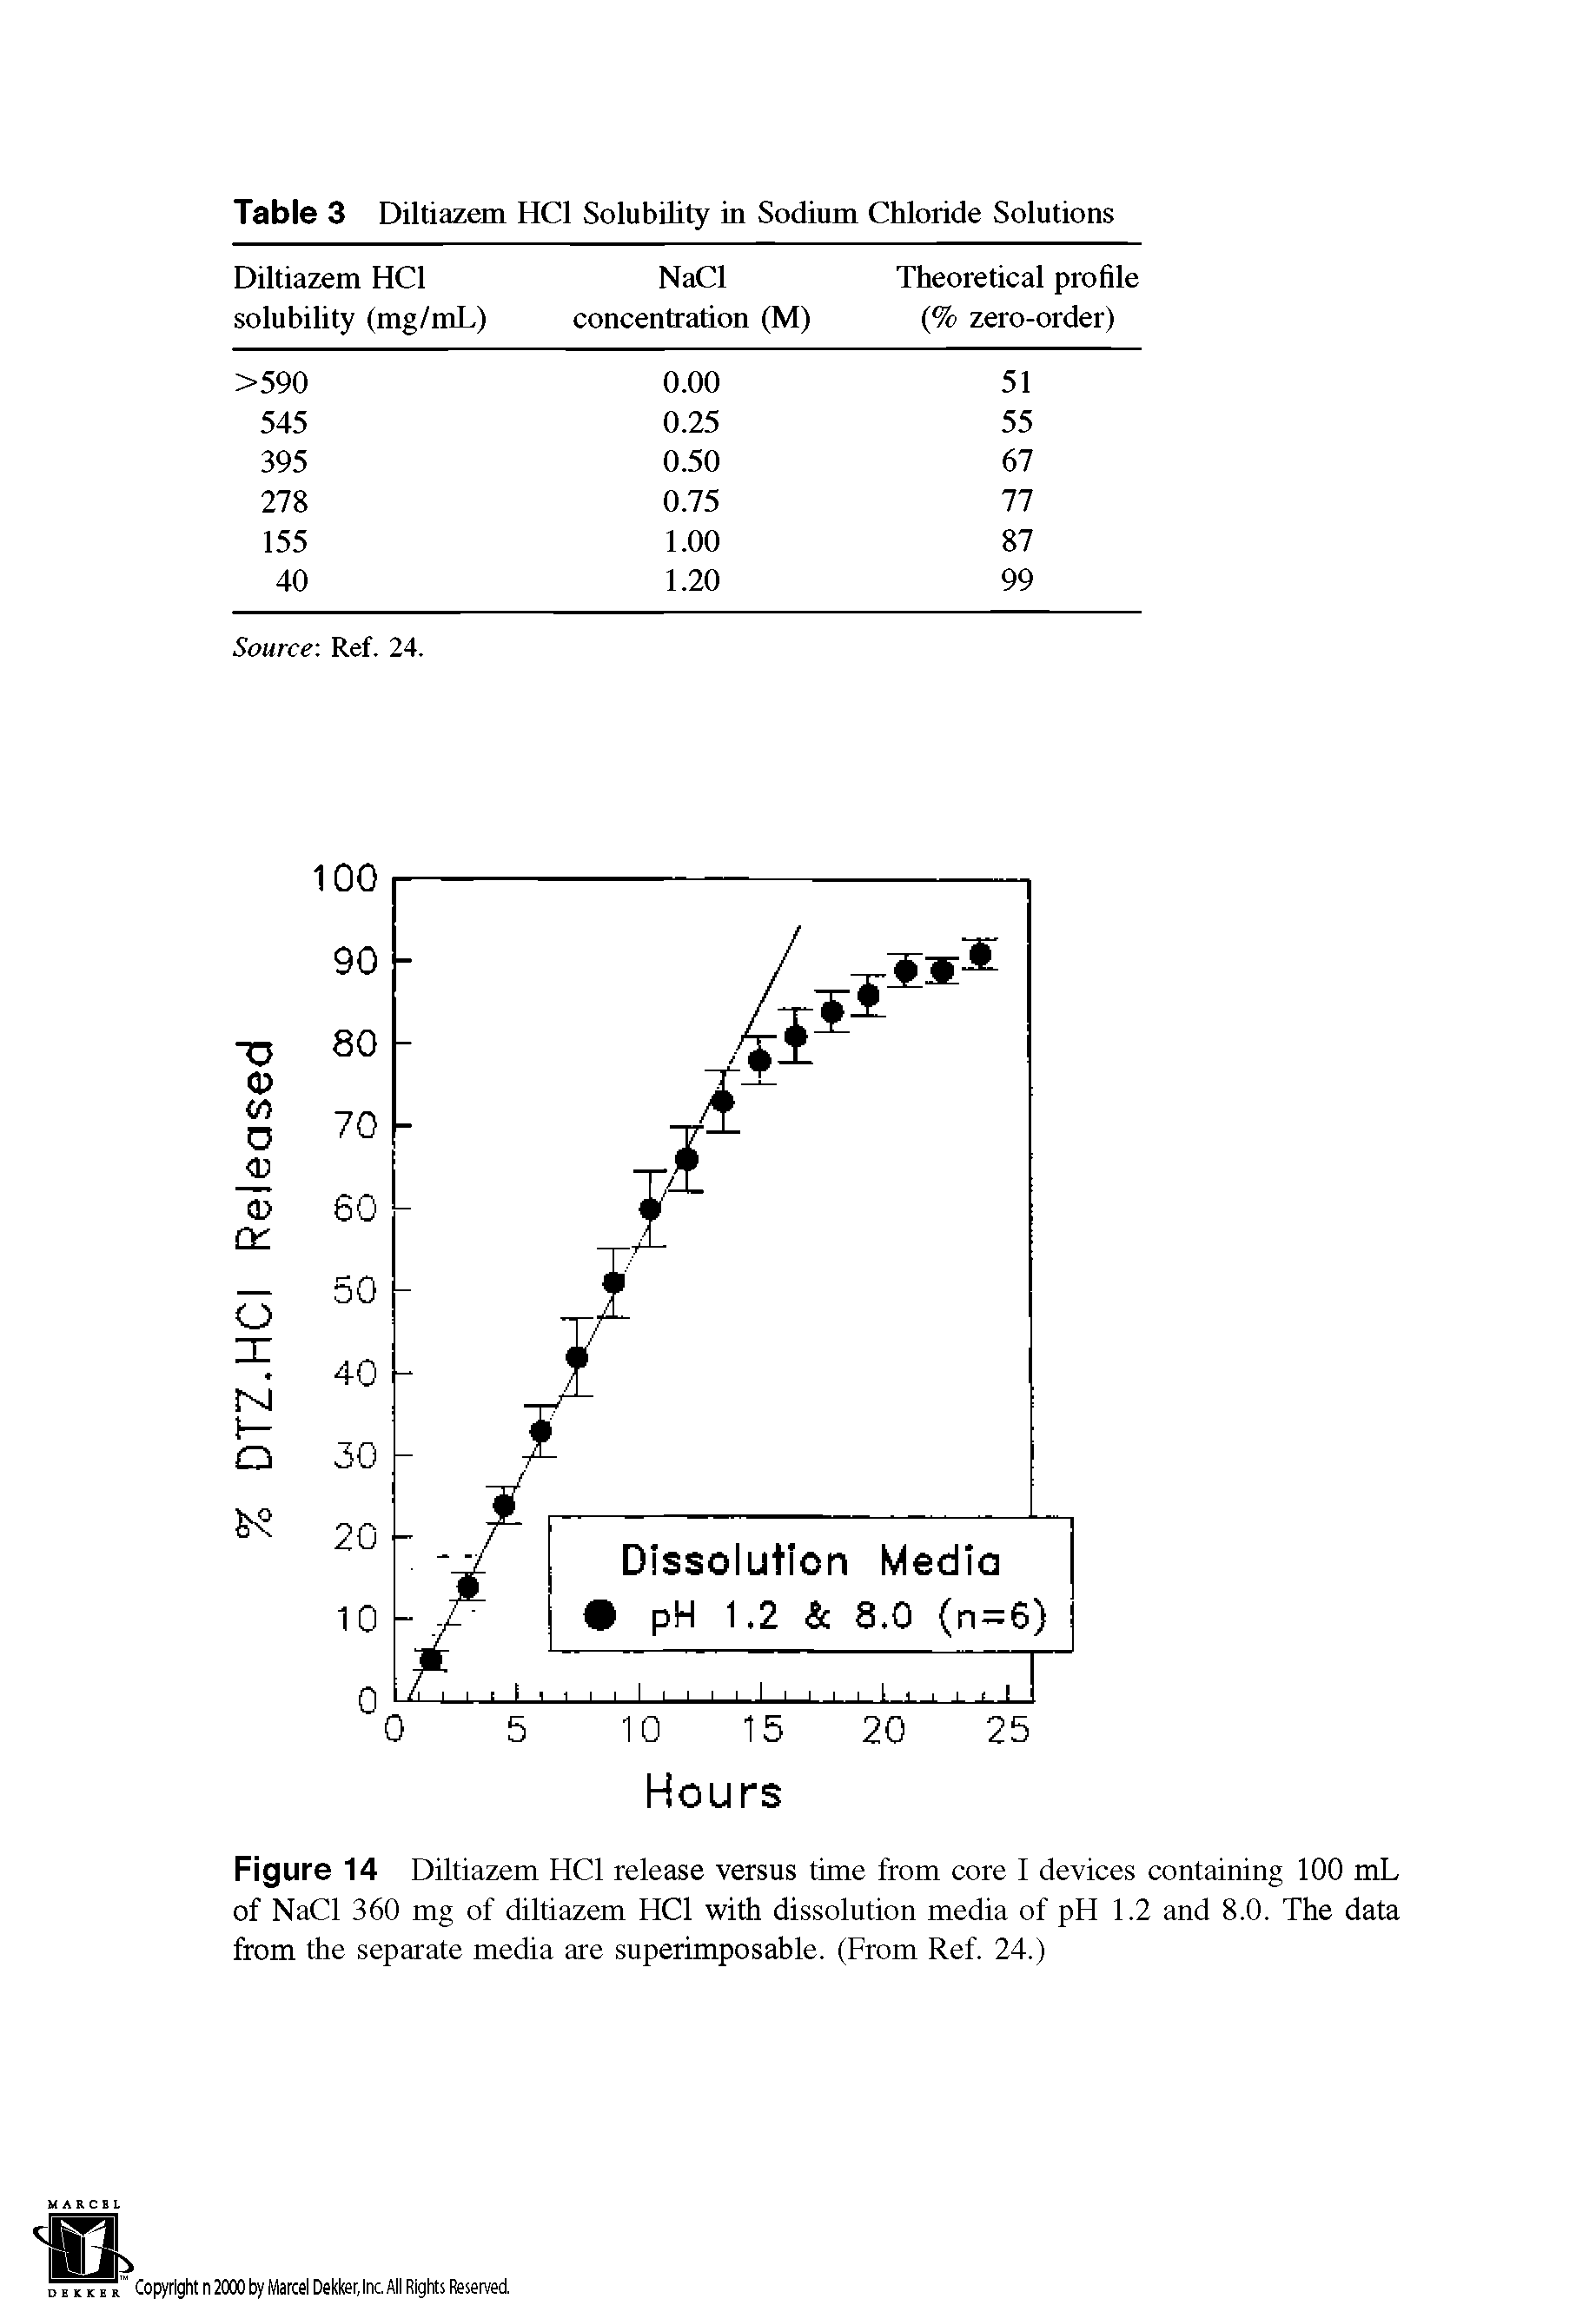 Figure 14 Diltiazem HC1 release versus time from core I devices containing 100 mL of NaCl 360 mg of diltiazem HC1 with dissolution media of pH 1.2 and 8.0. The data from the separate media are superimposable. (From Ref. 24.)...